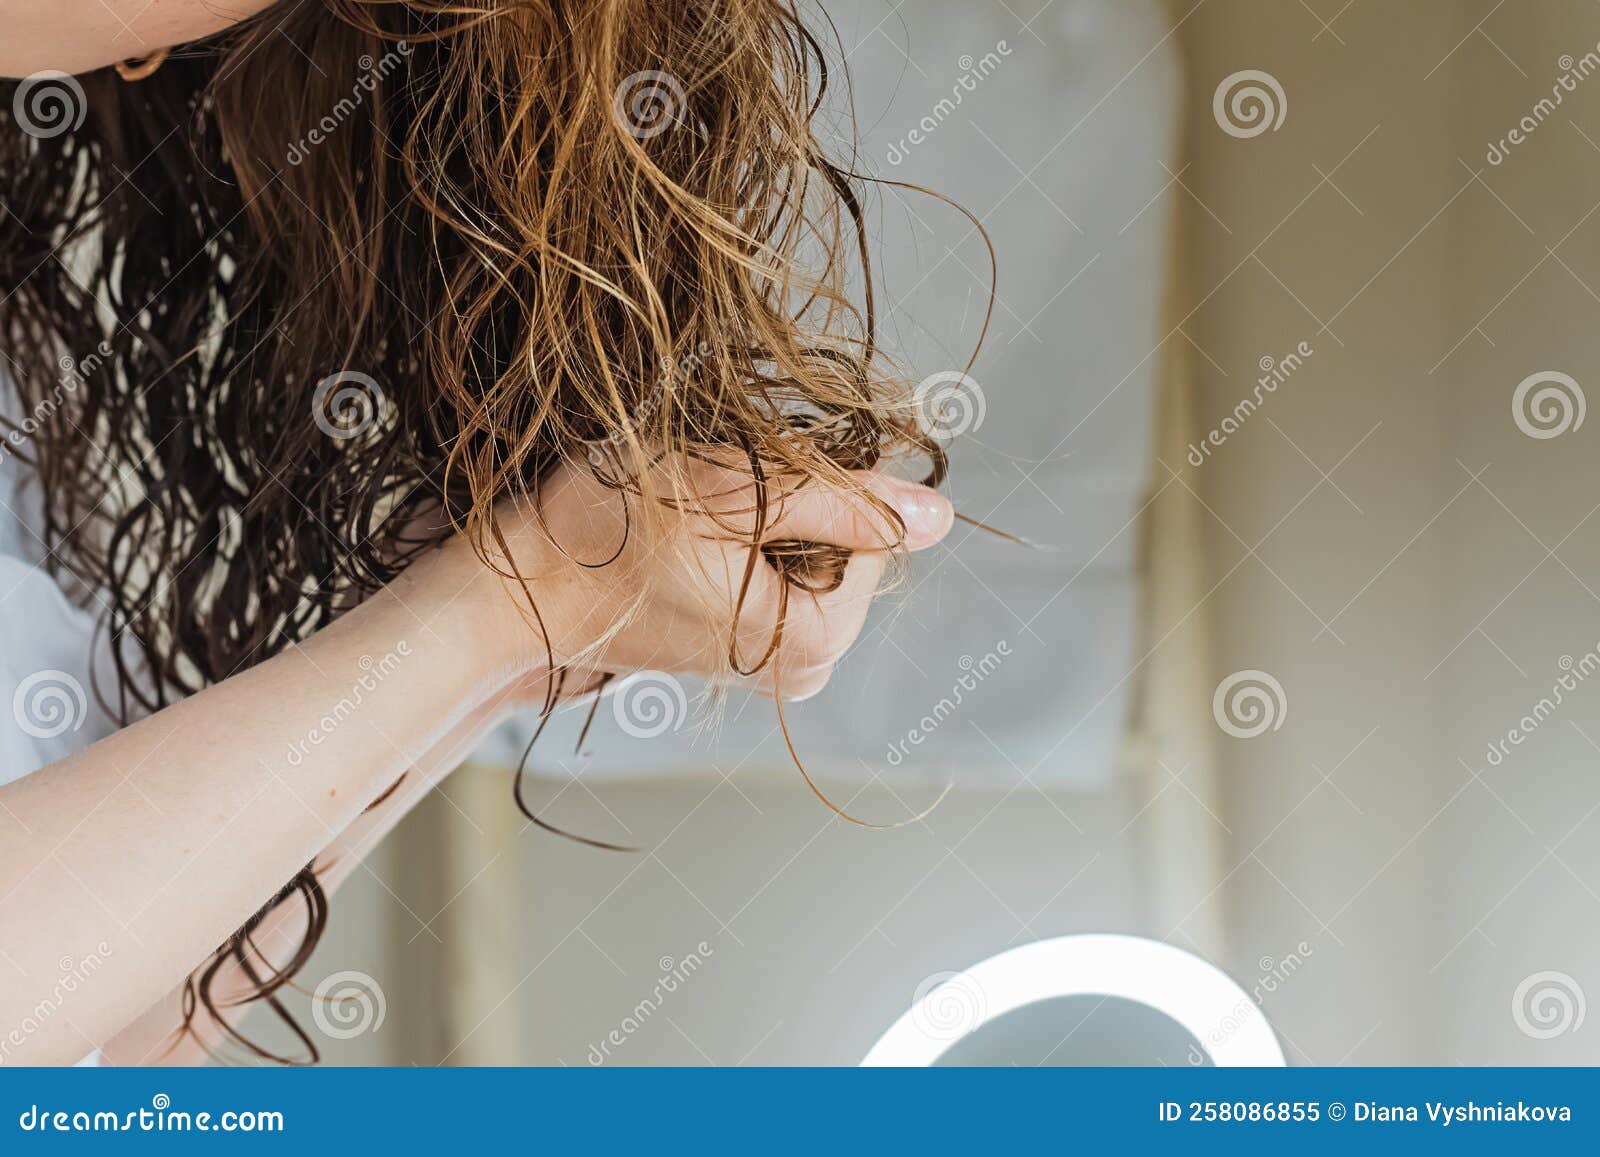 woman scrunching her hair to form curls.